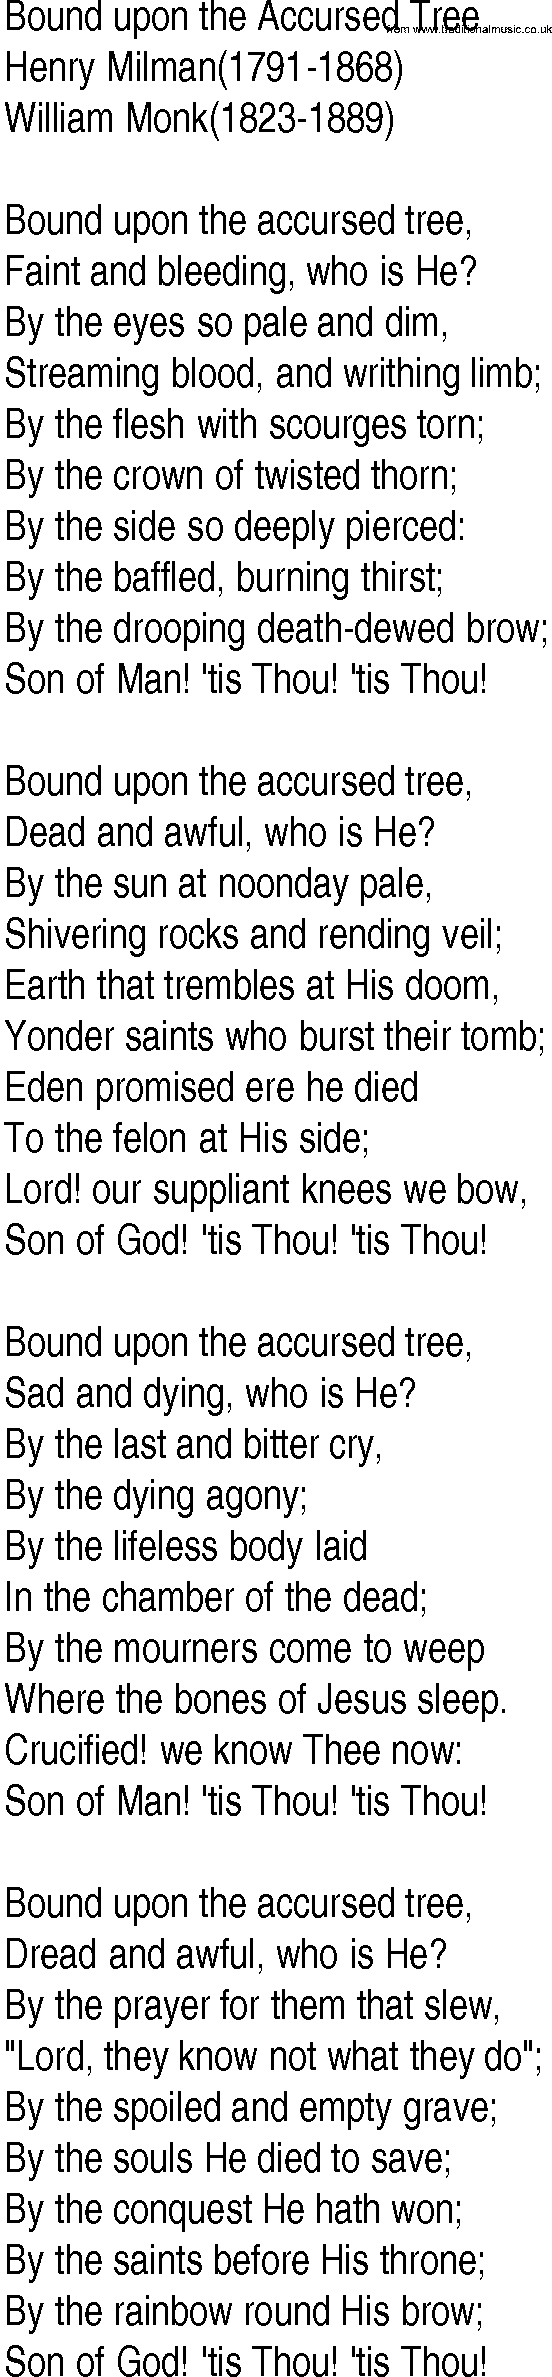 Hymn and Gospel Song: Bound upon the Accursed Tree by Henry Milman lyrics